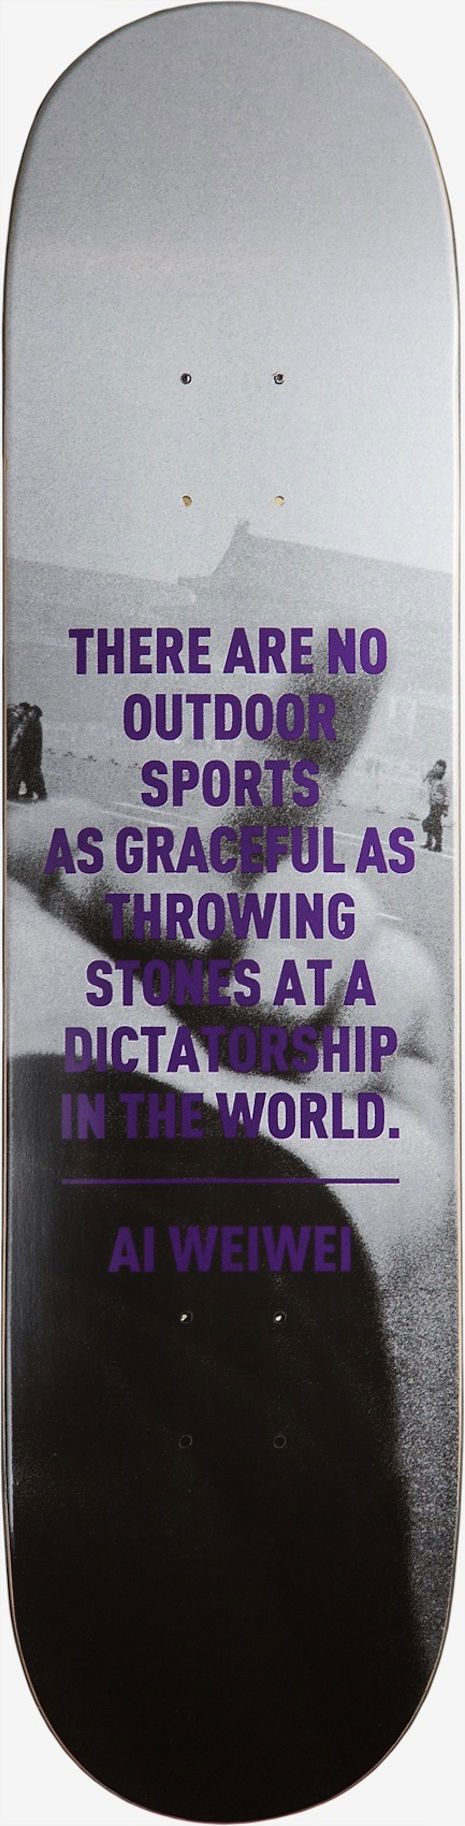 “There Are No Outdoor Sports as Graceful as Throwing Stones at a Dictatorship in the World”